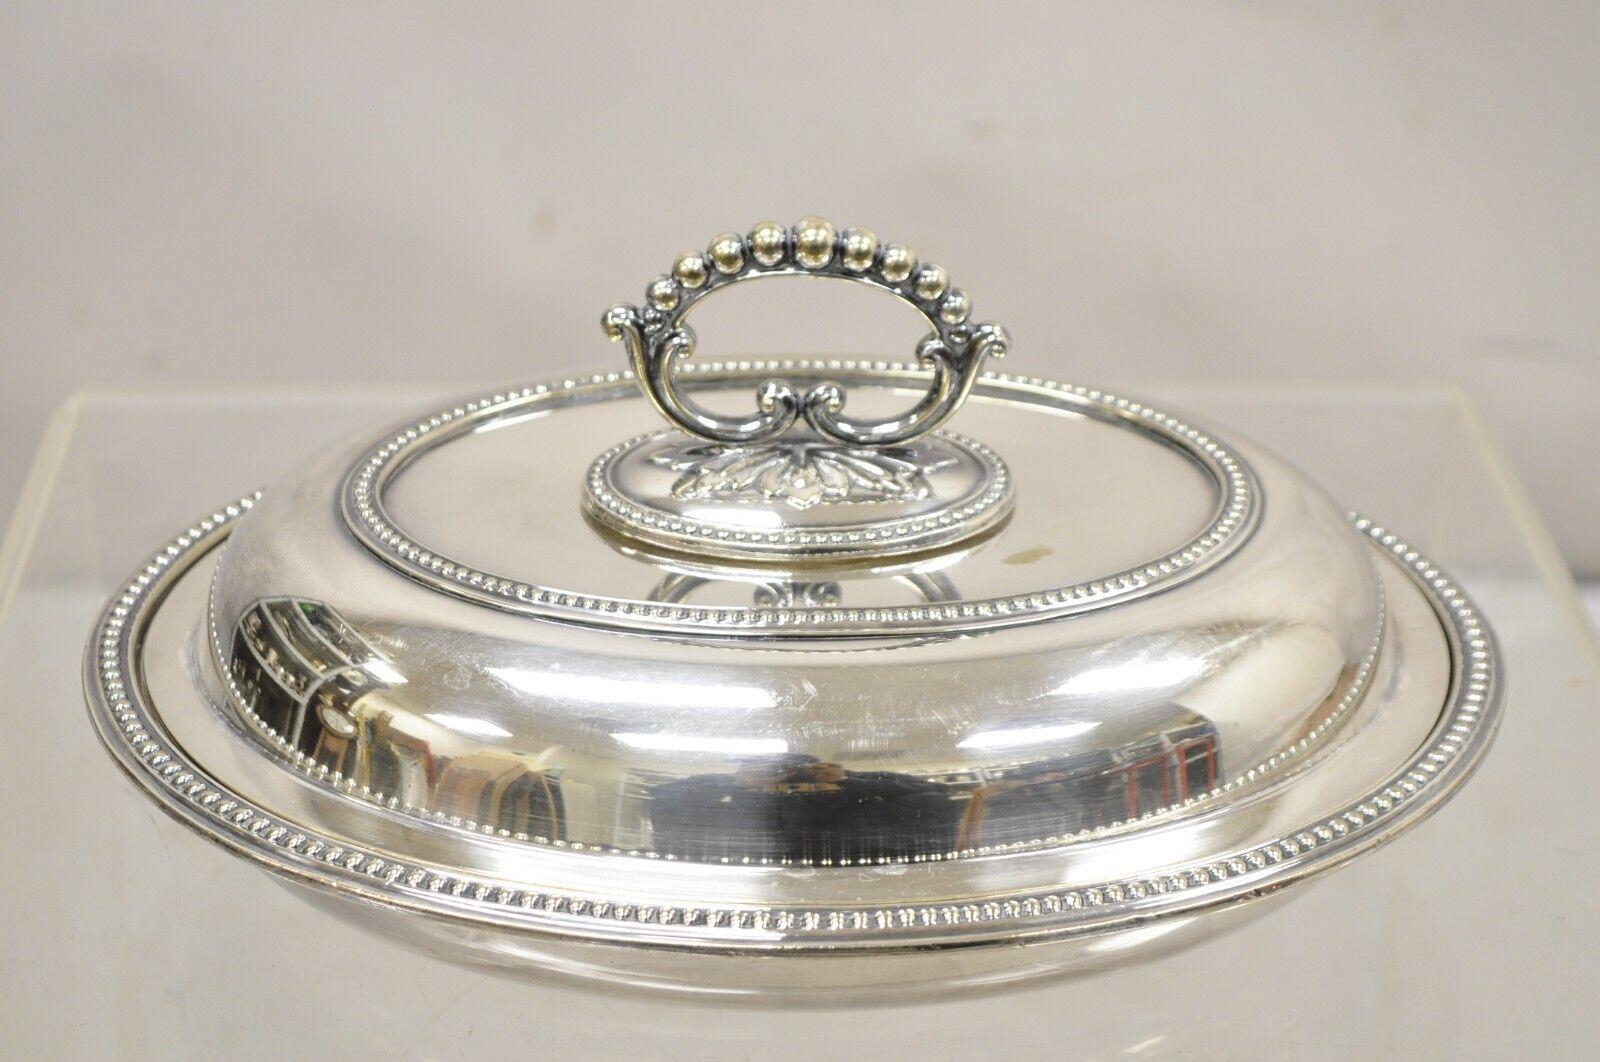 Mappin & Webb's Prince's Plate English Sheffield Silver Plated Covered Dish im Angebot 5